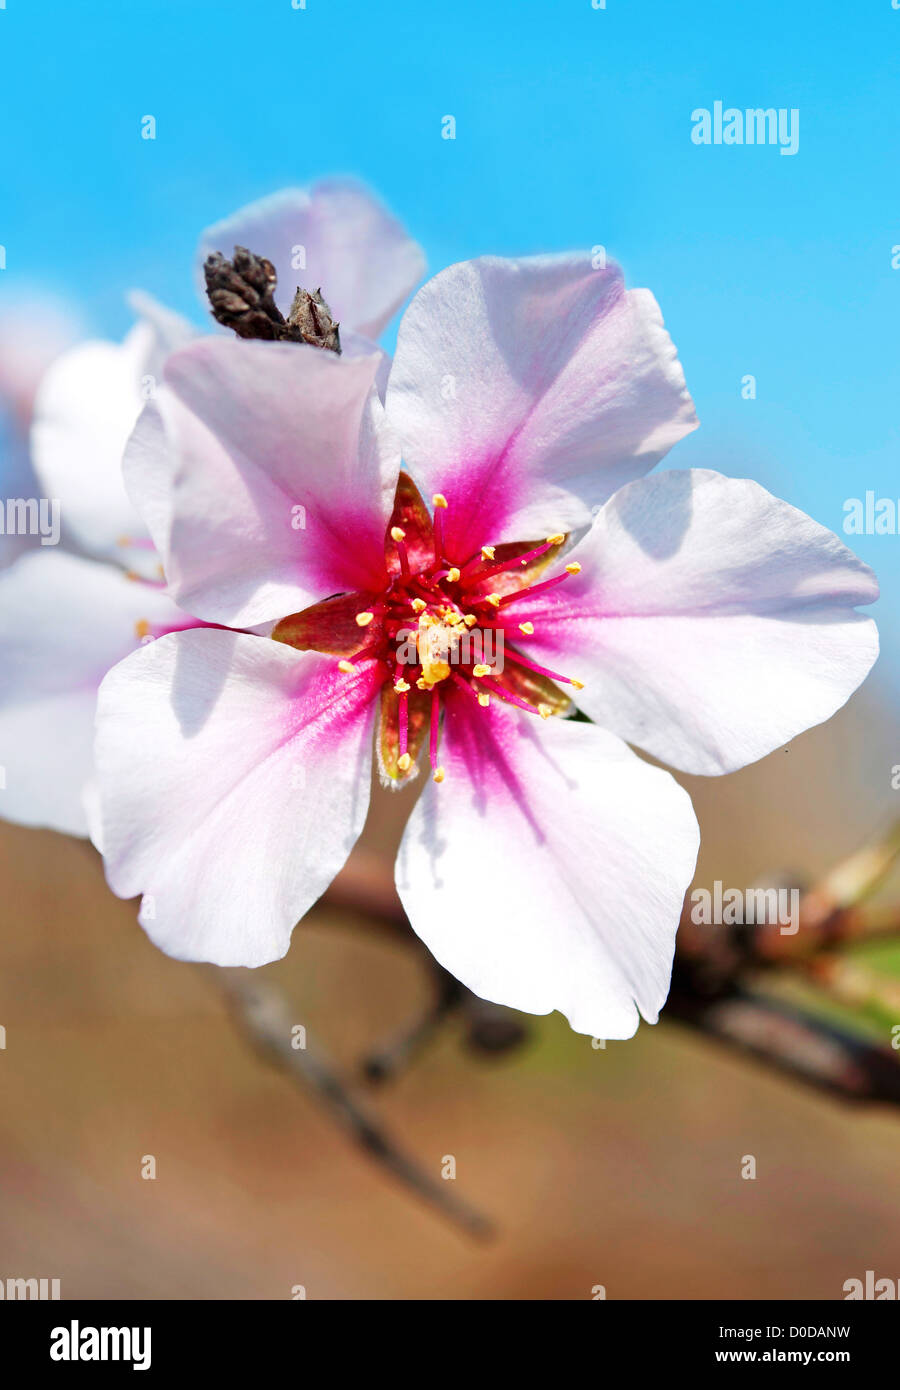 Almond flowers in April Stock Photo